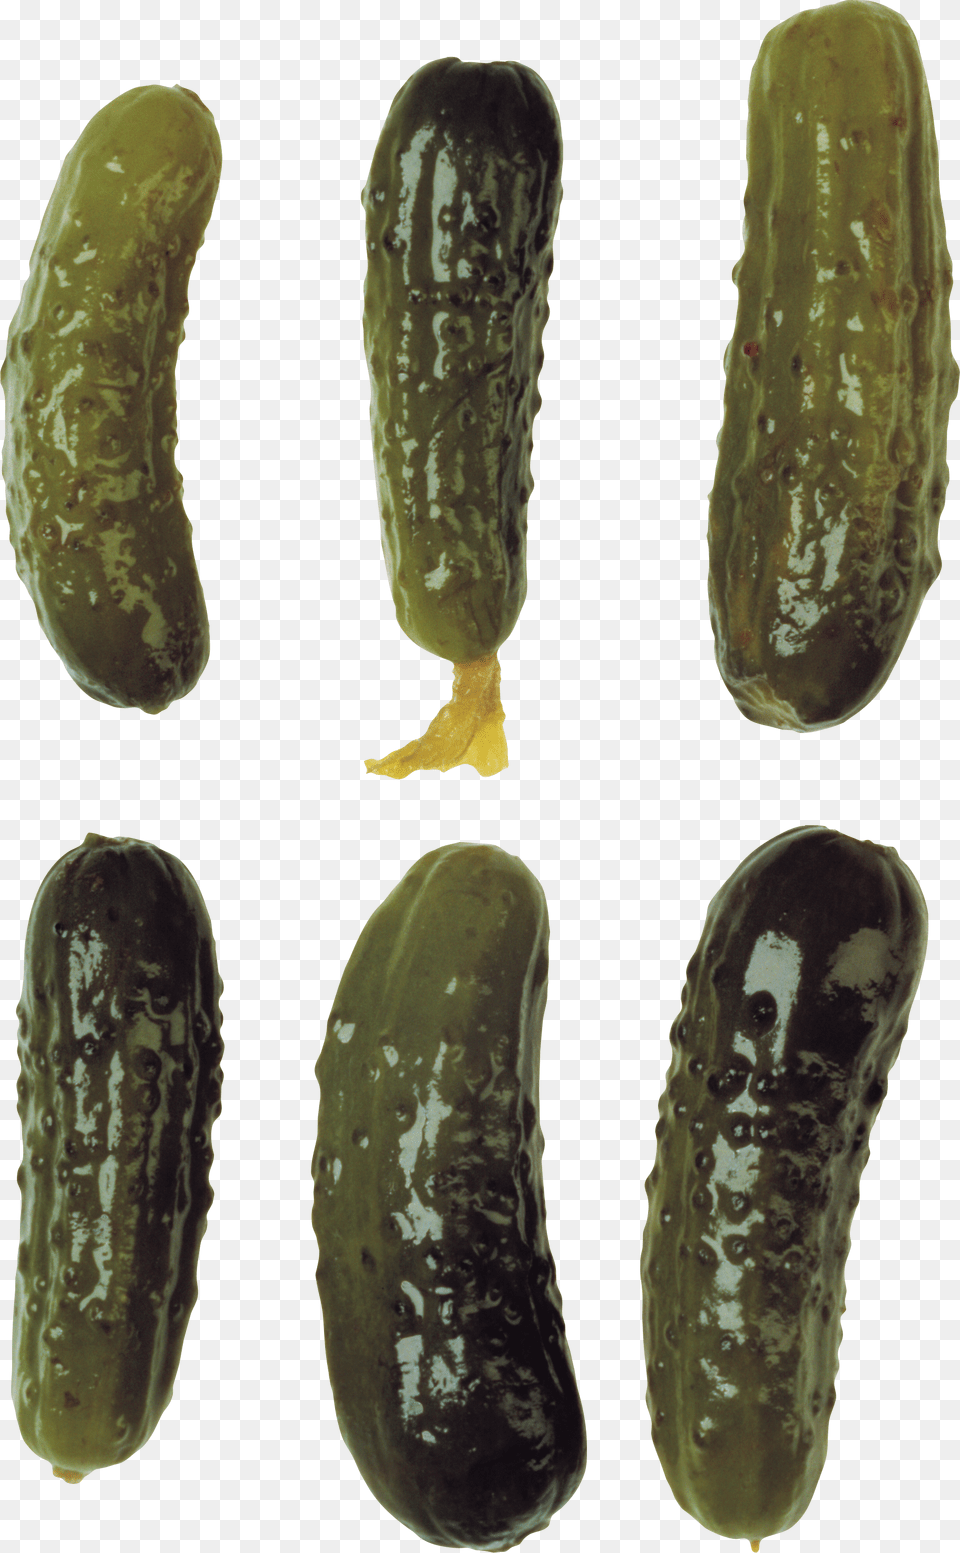 Cucumber, Food, Relish, Pickle, Clothing Png Image